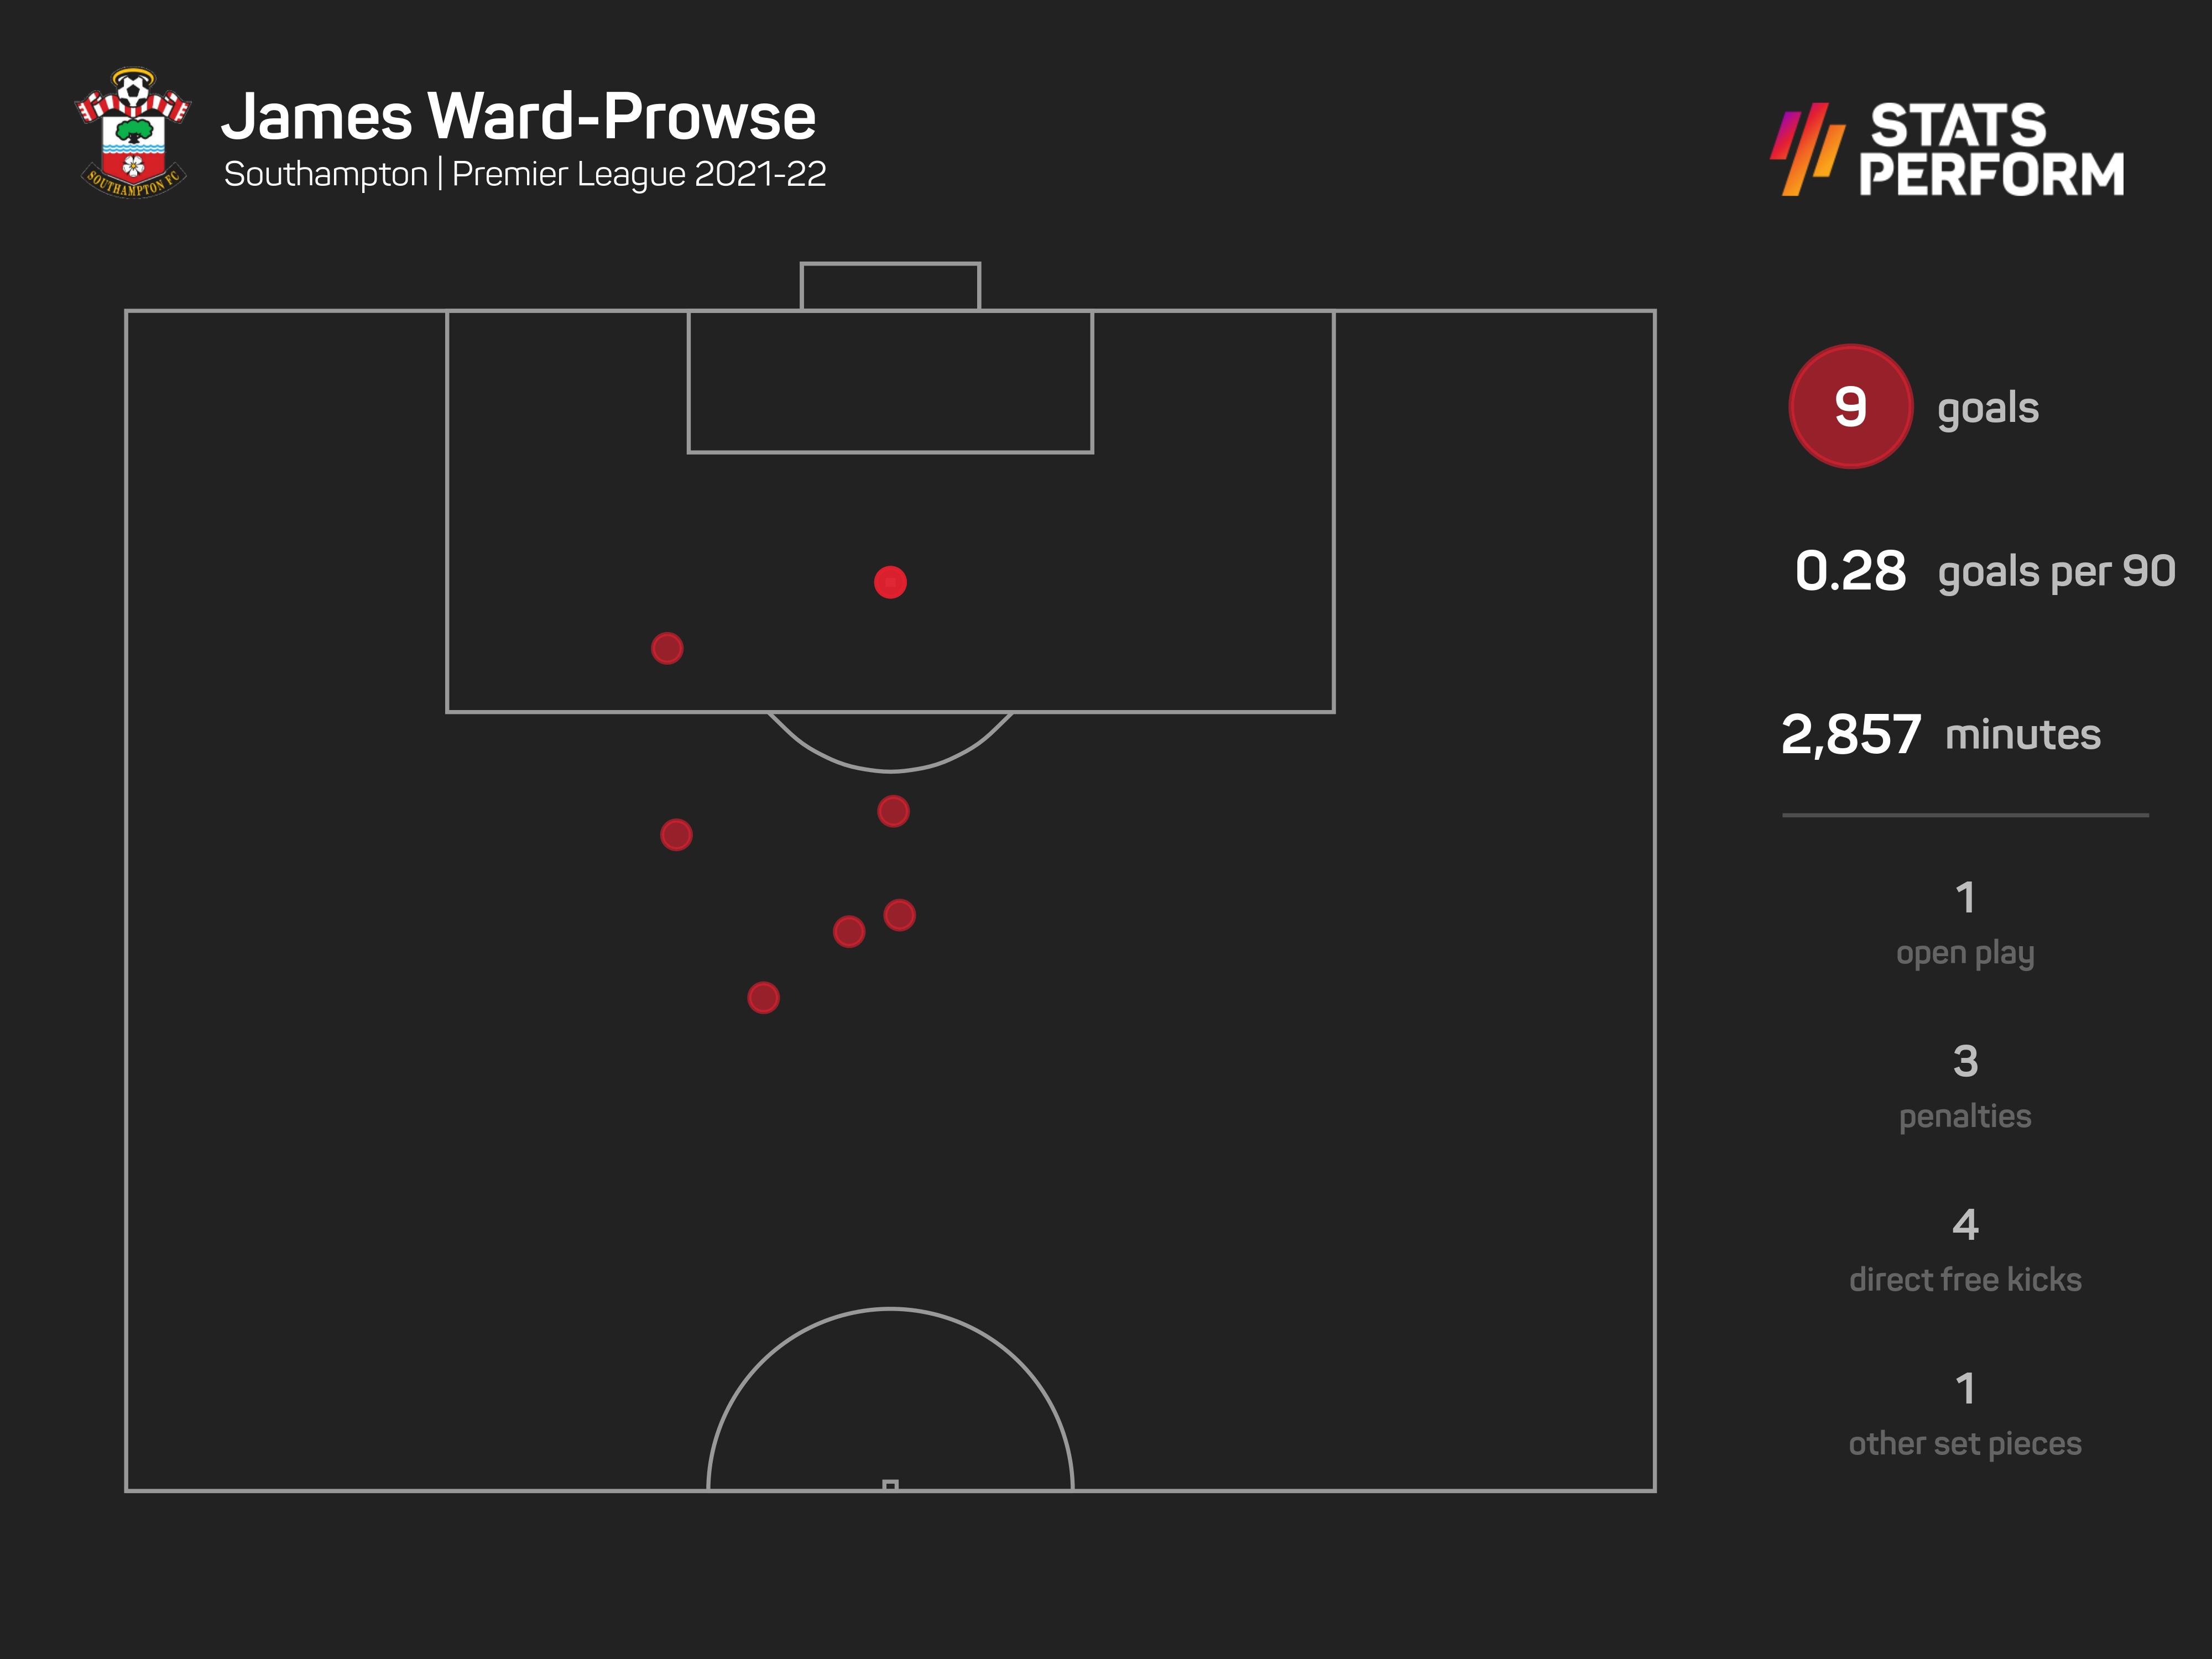 James Ward-Prowse has scored four goals directly from free-kicks this season